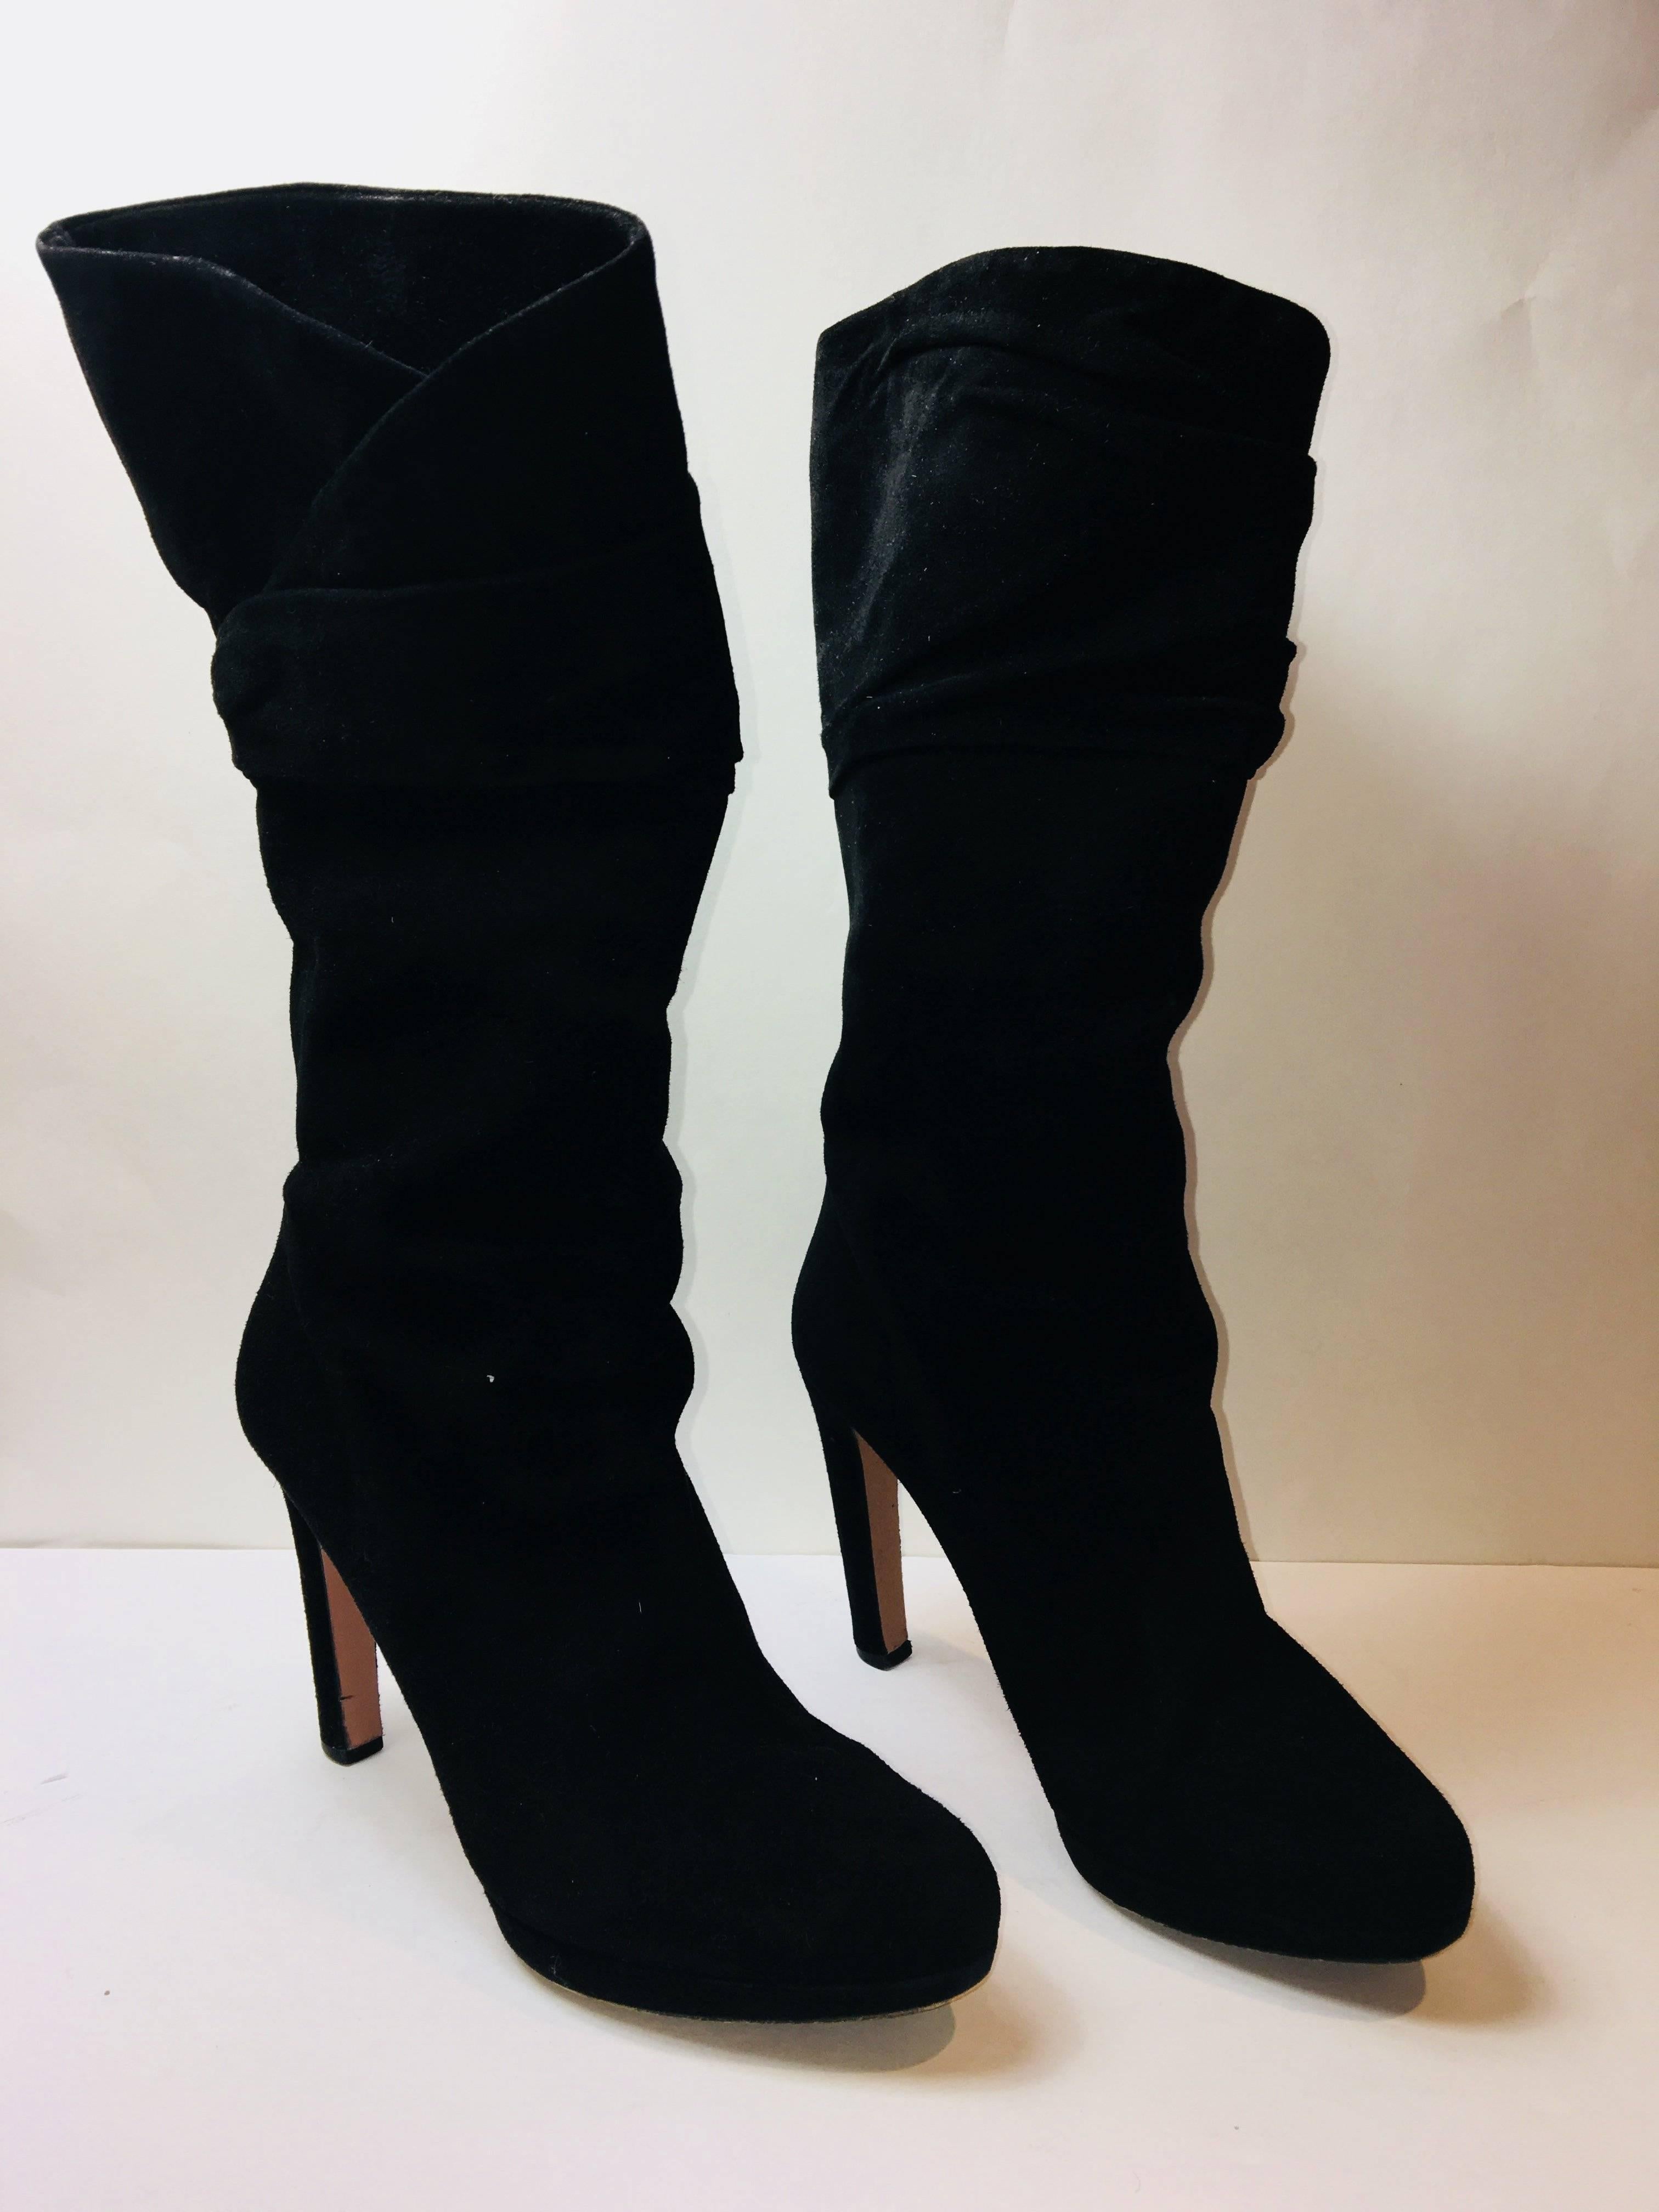 Prada Mid Calf Suede Boot with High Heel and Folded Detail at Calf.